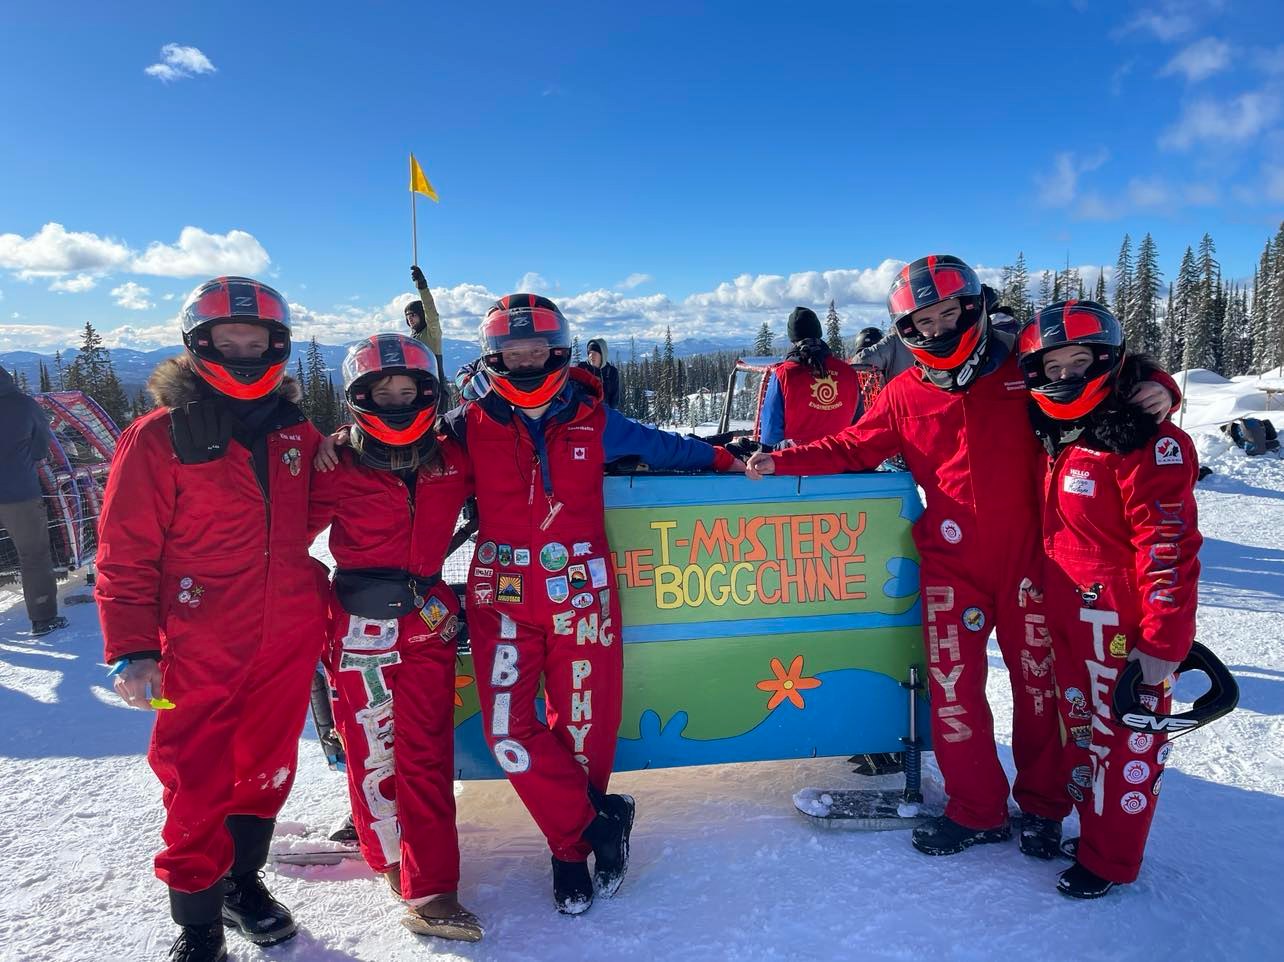 Five people in red snowsuits posing for a photo around a blue and green five-seater toboggan